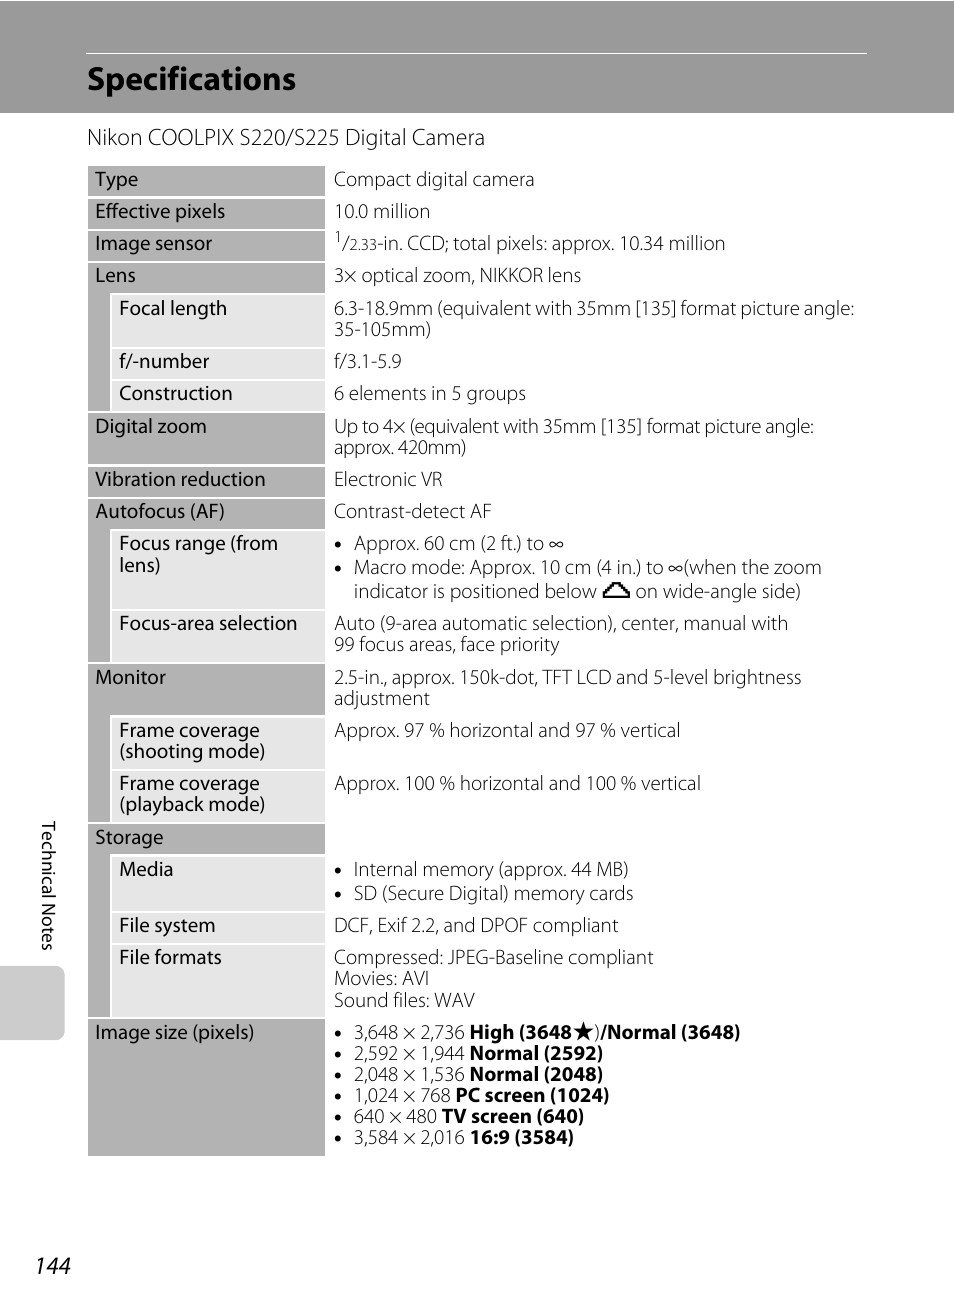 Specifications | Nikon Coolpix S220 User Manual | Page 156 / 164